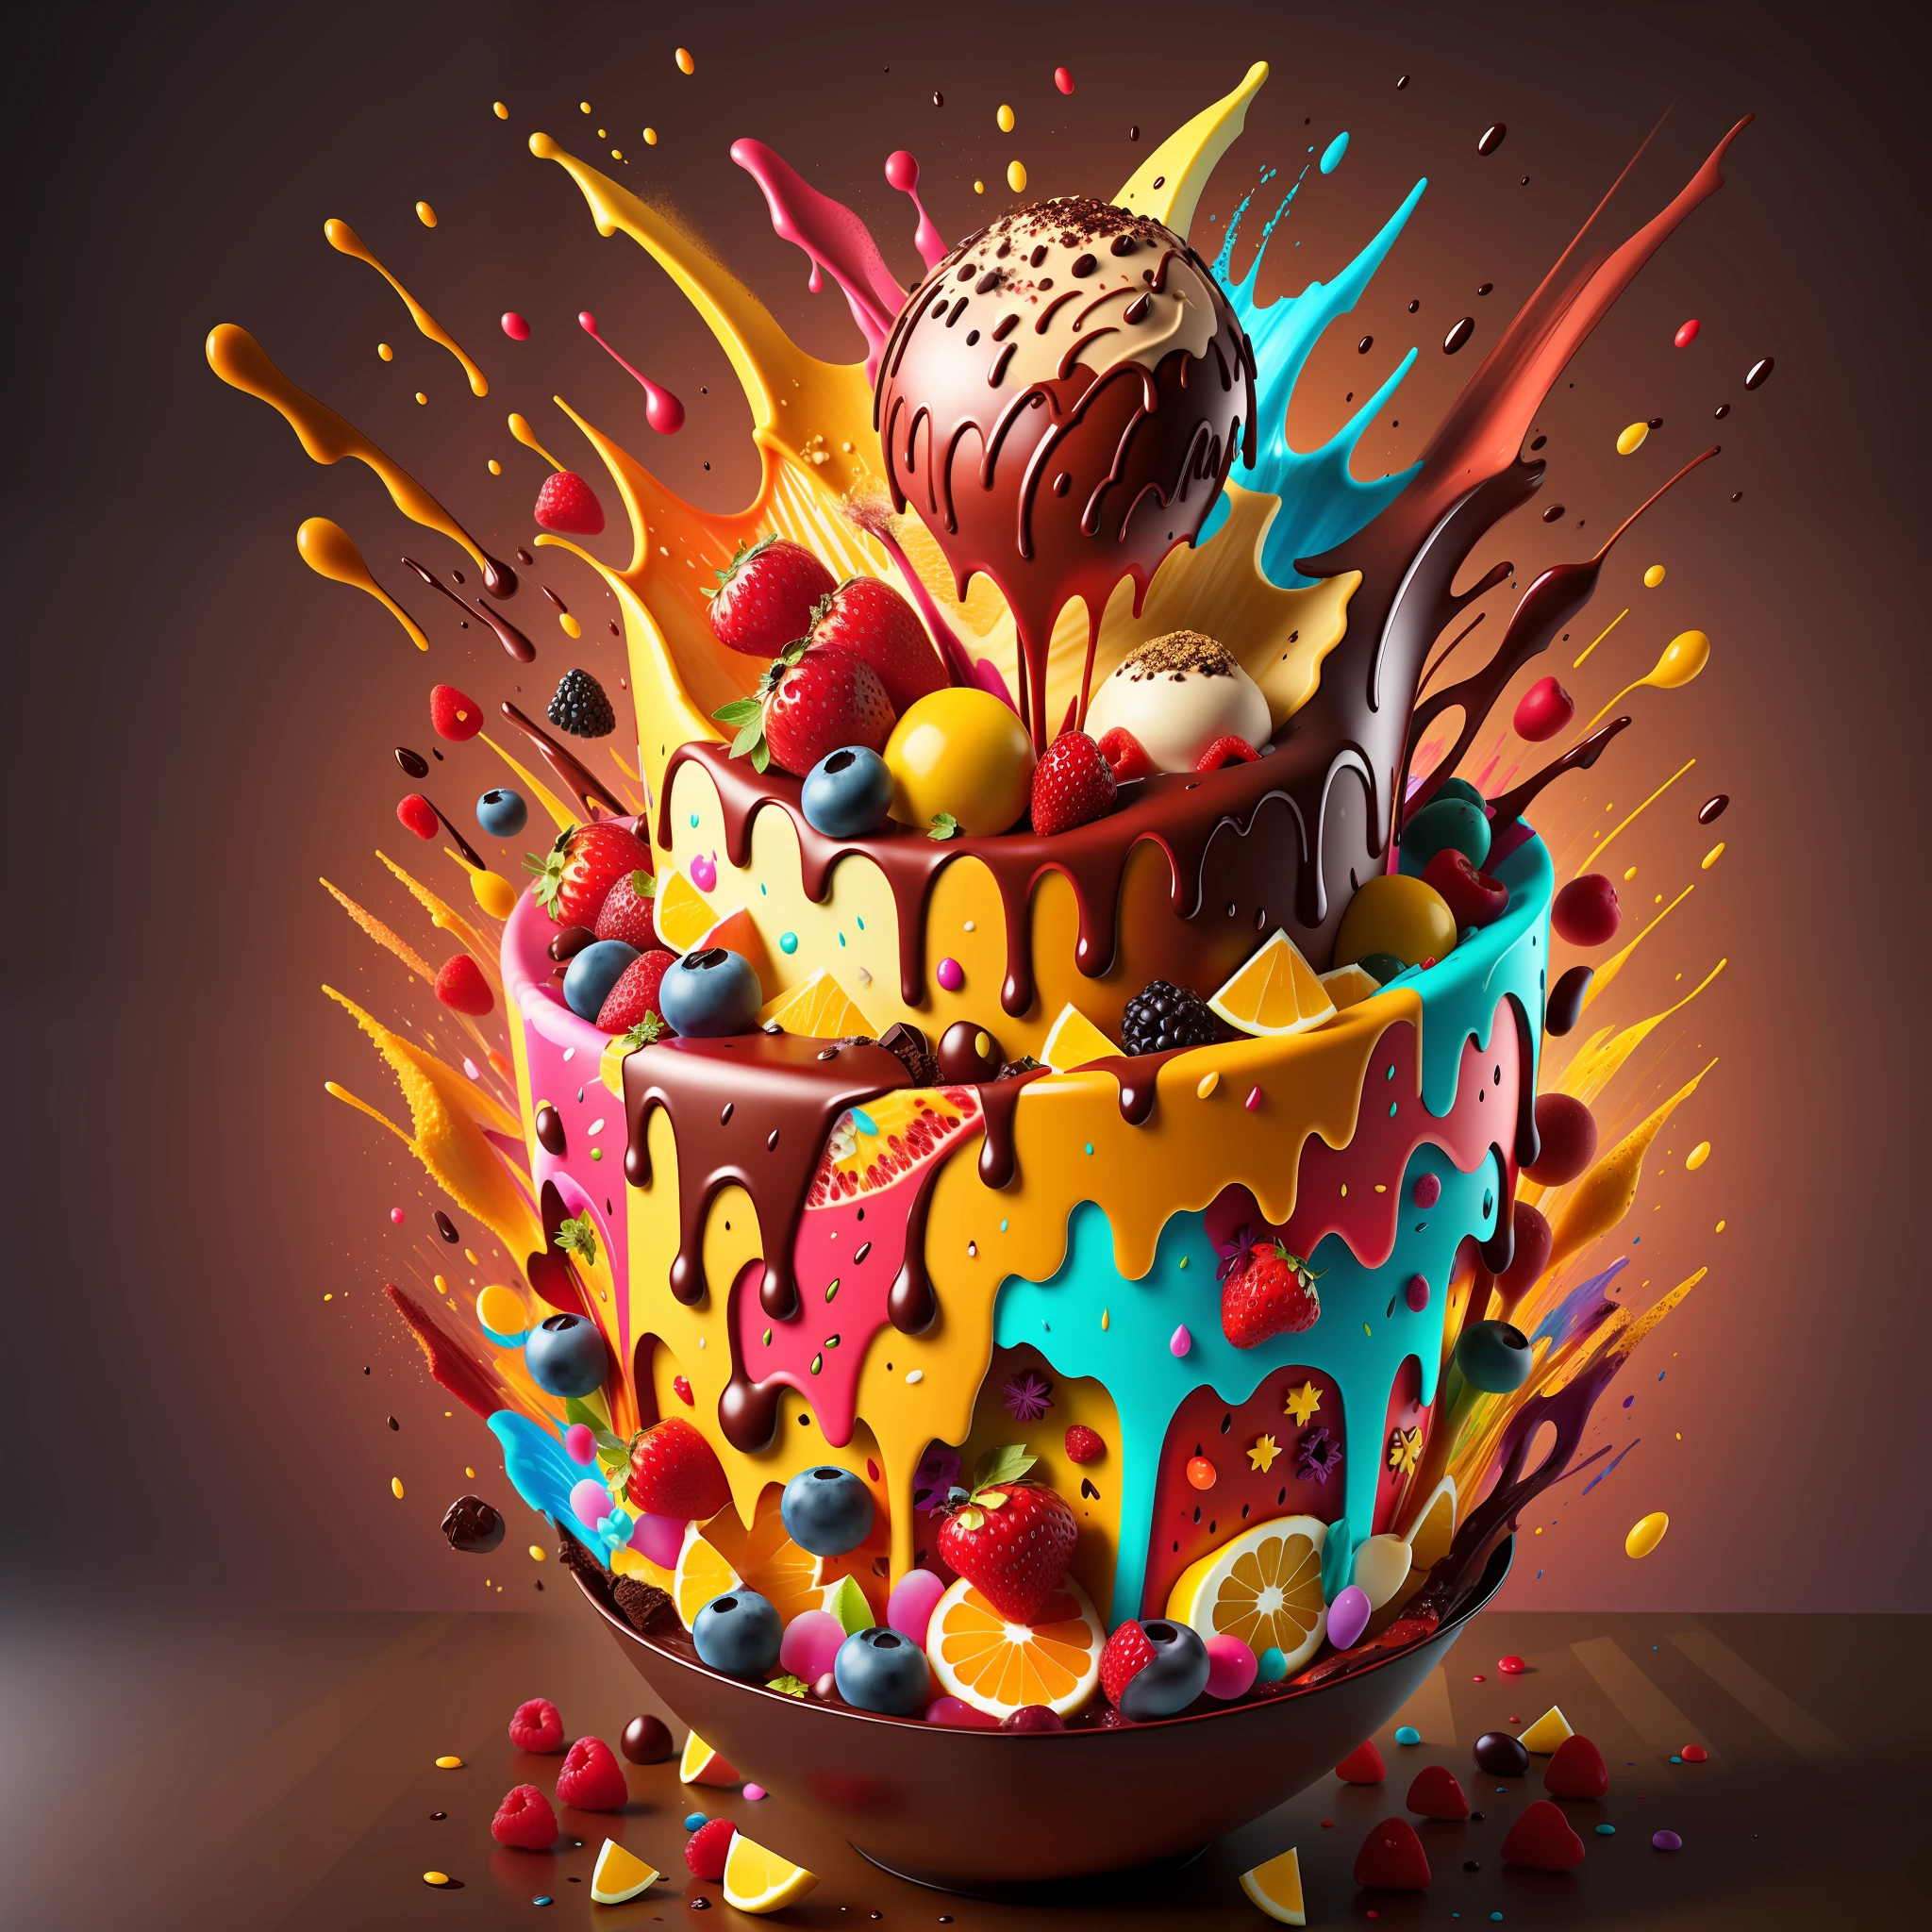 (explosion:0.6) of fruits and dark chocolate ice-cream, high detail, very realistic, bright environment, fruit explosion